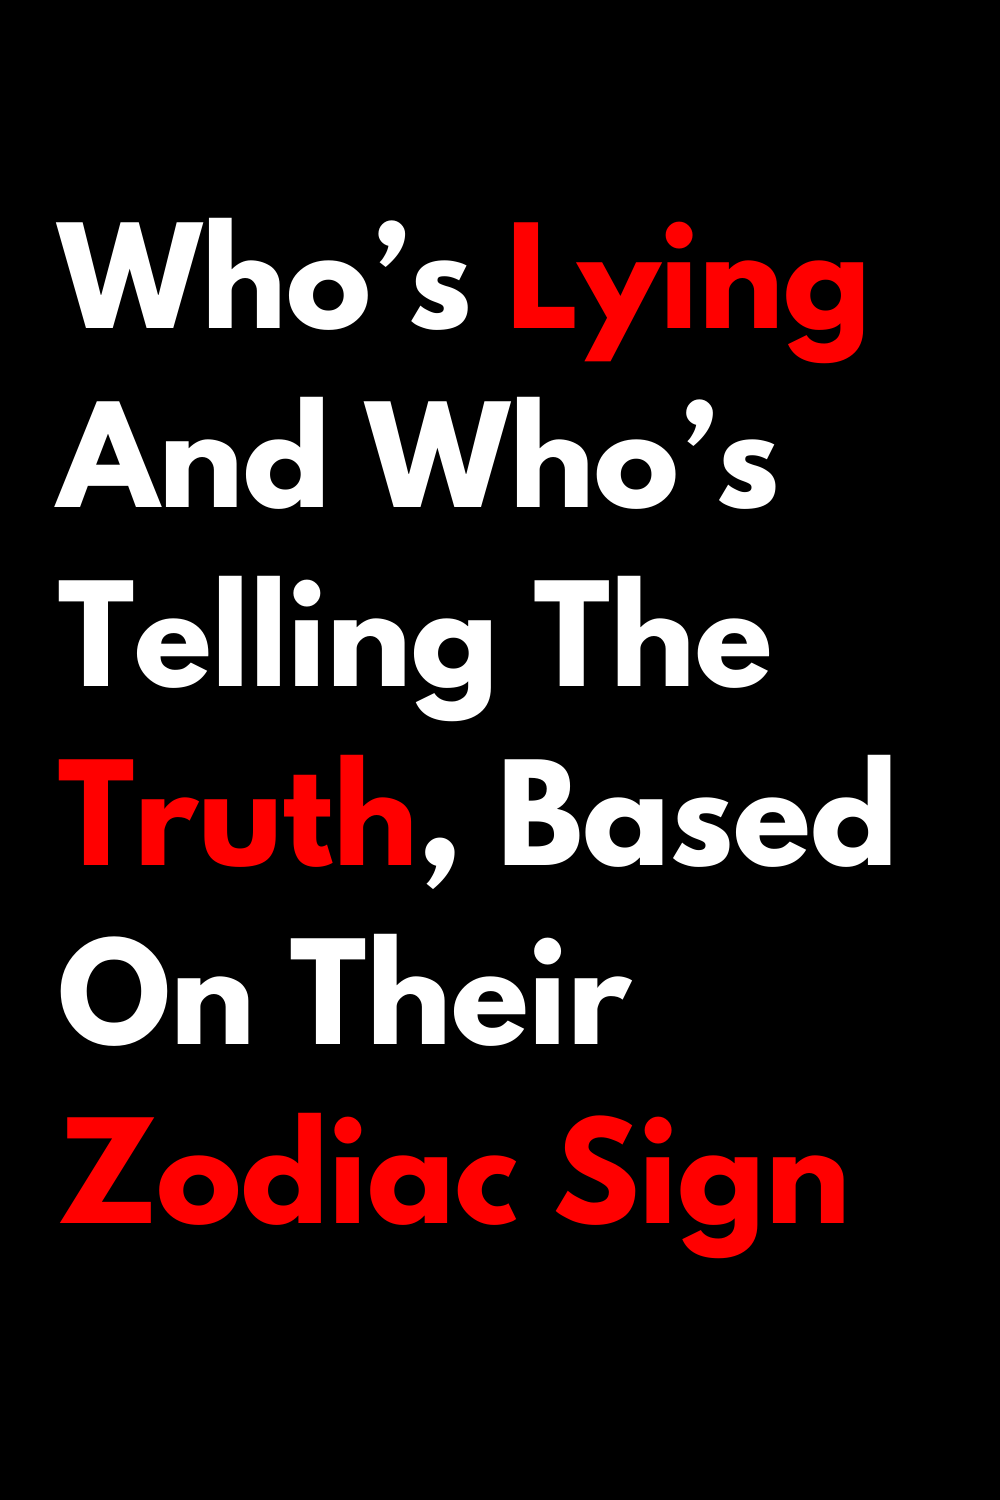 Who’s Lying And Who’s Telling The Truth, Based On Their Zodiac Sign